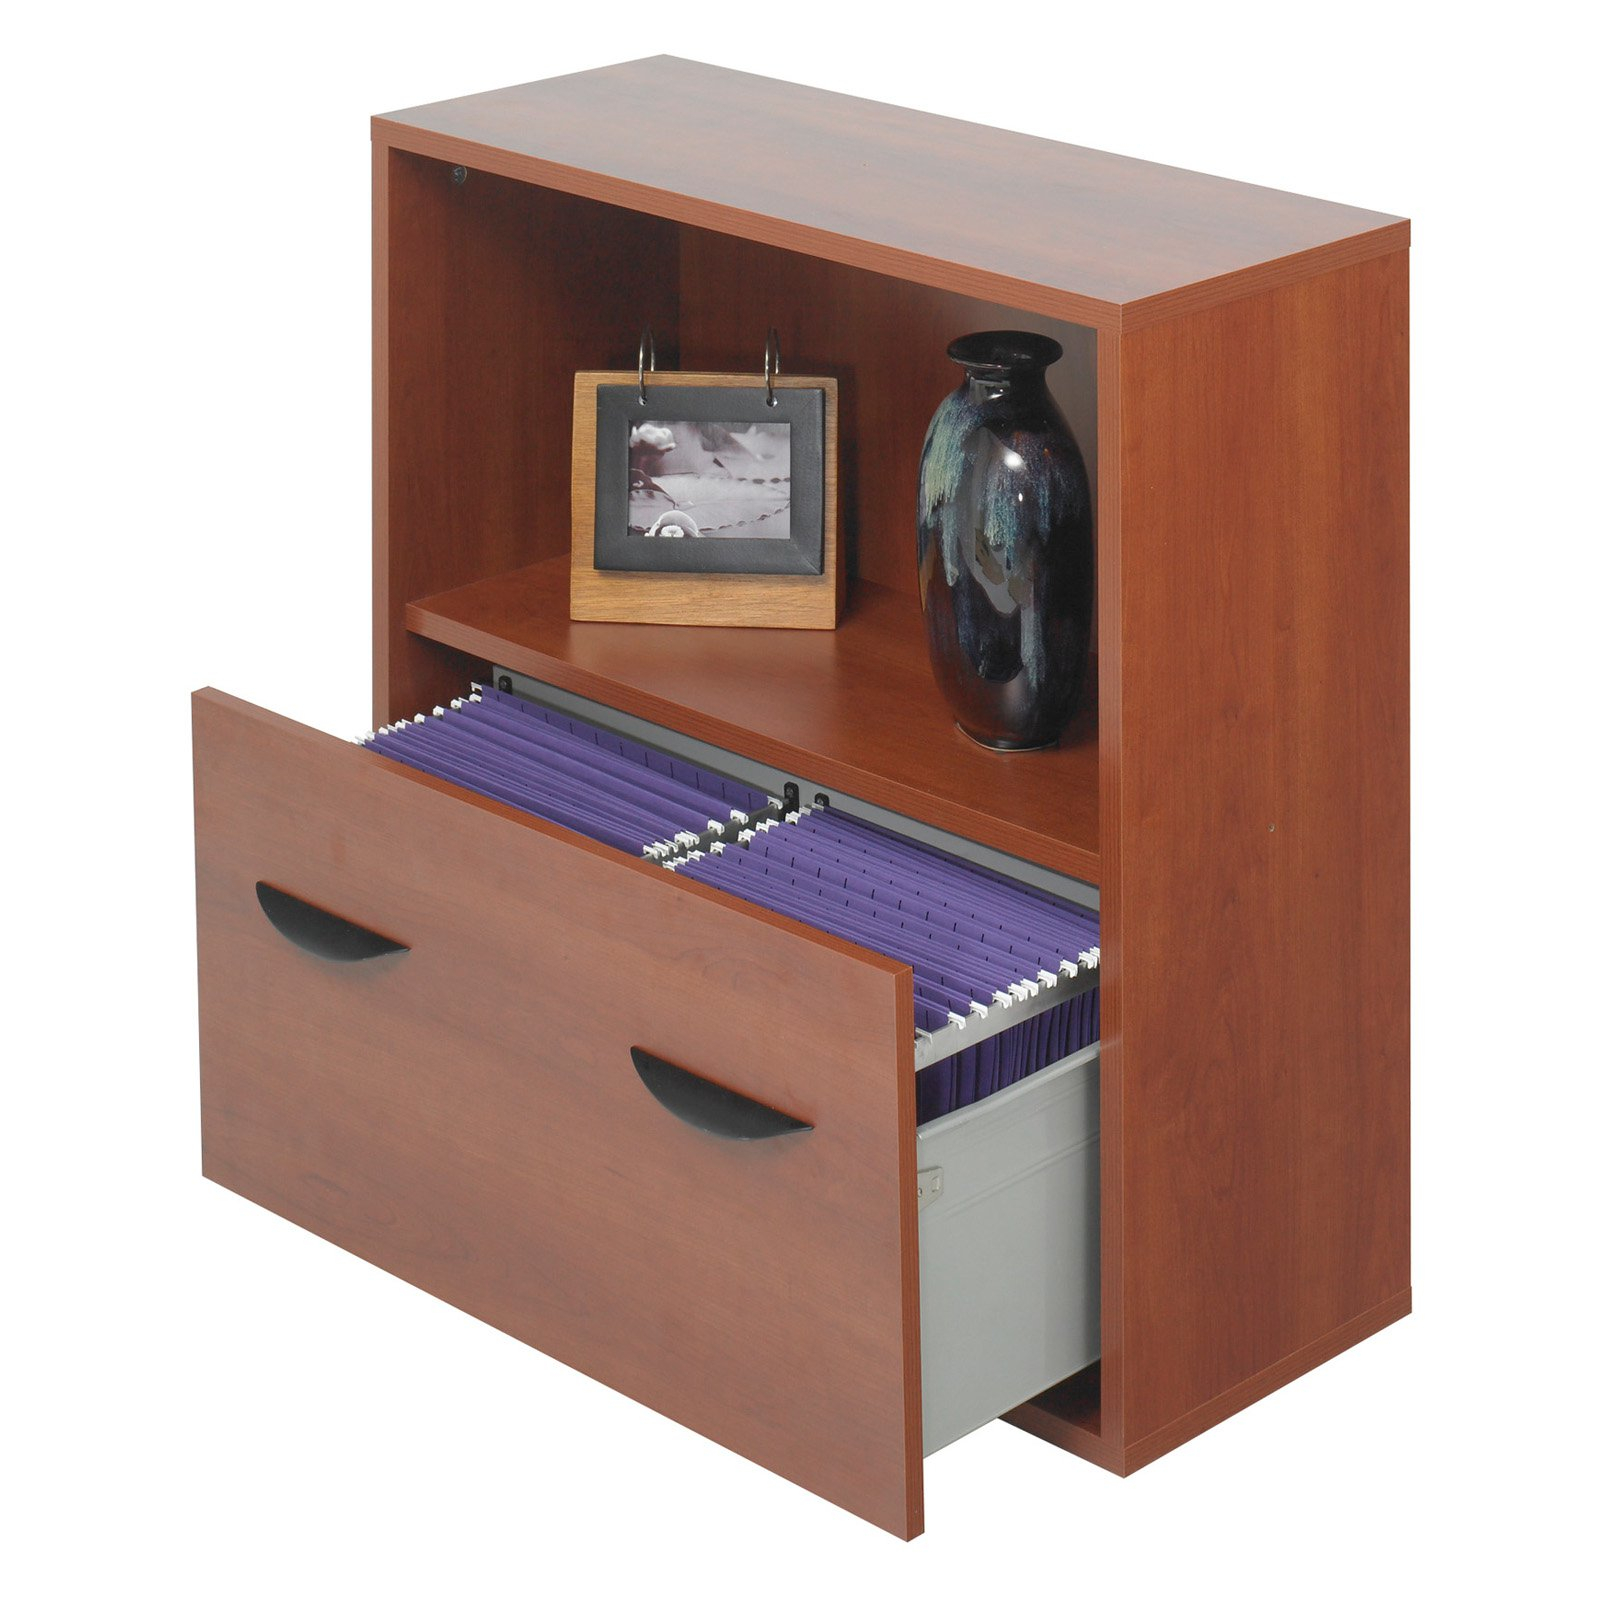 Safco Lateral Filing Cabinet With Bookshelf Cherry Walmart intended for proportions 1600 X 1600